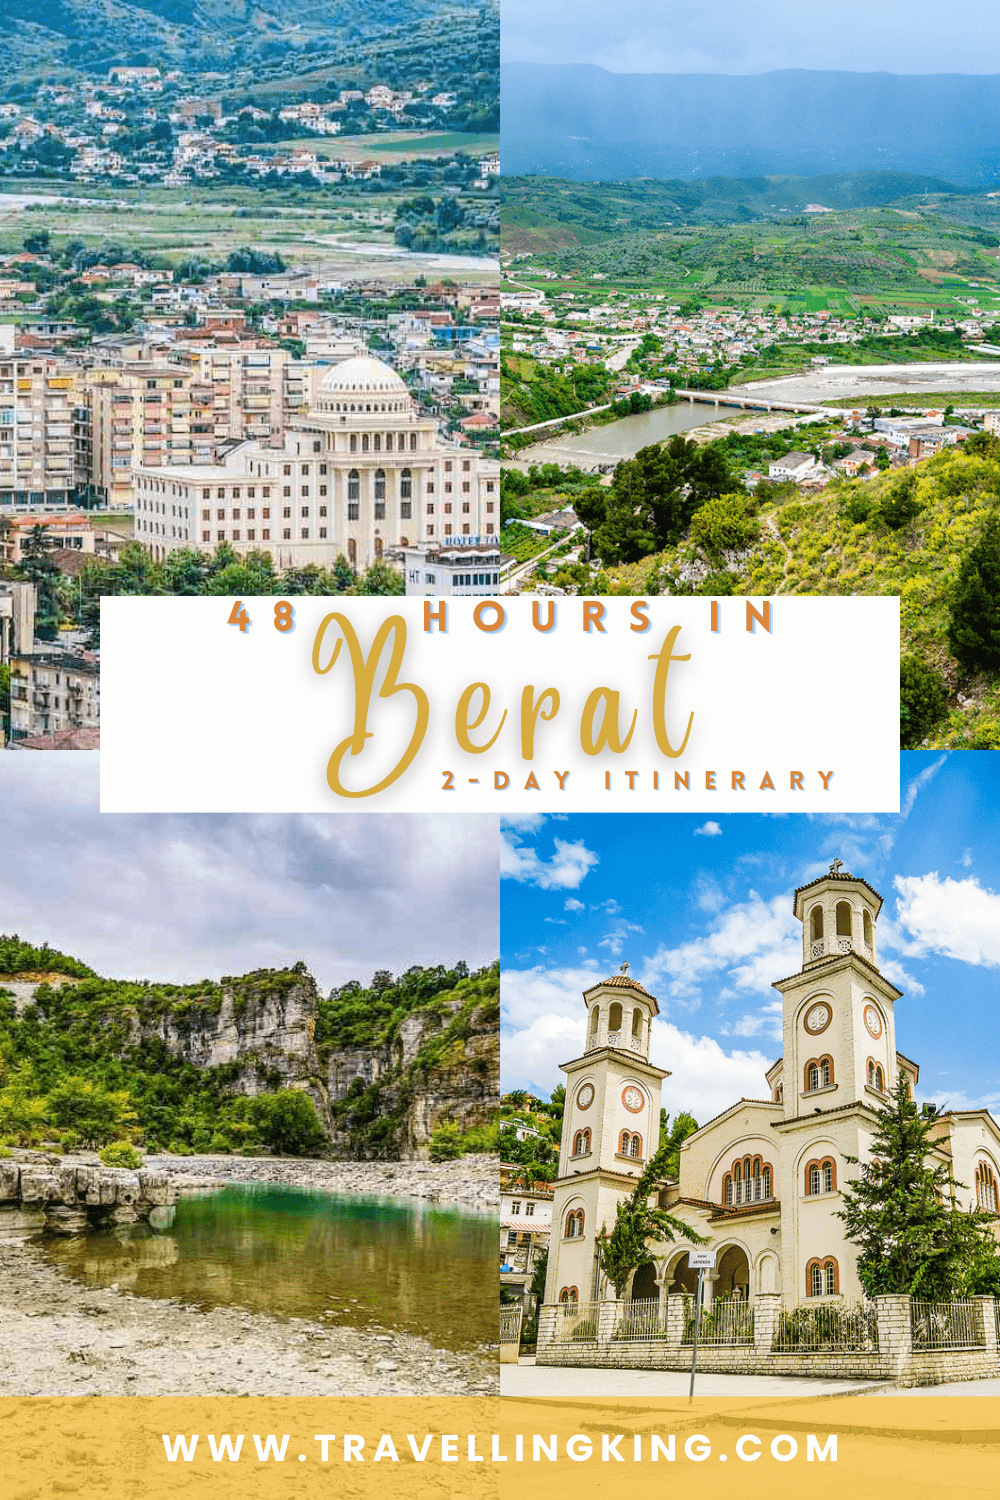 48 Hours in Berat - 2 Day Itinerary